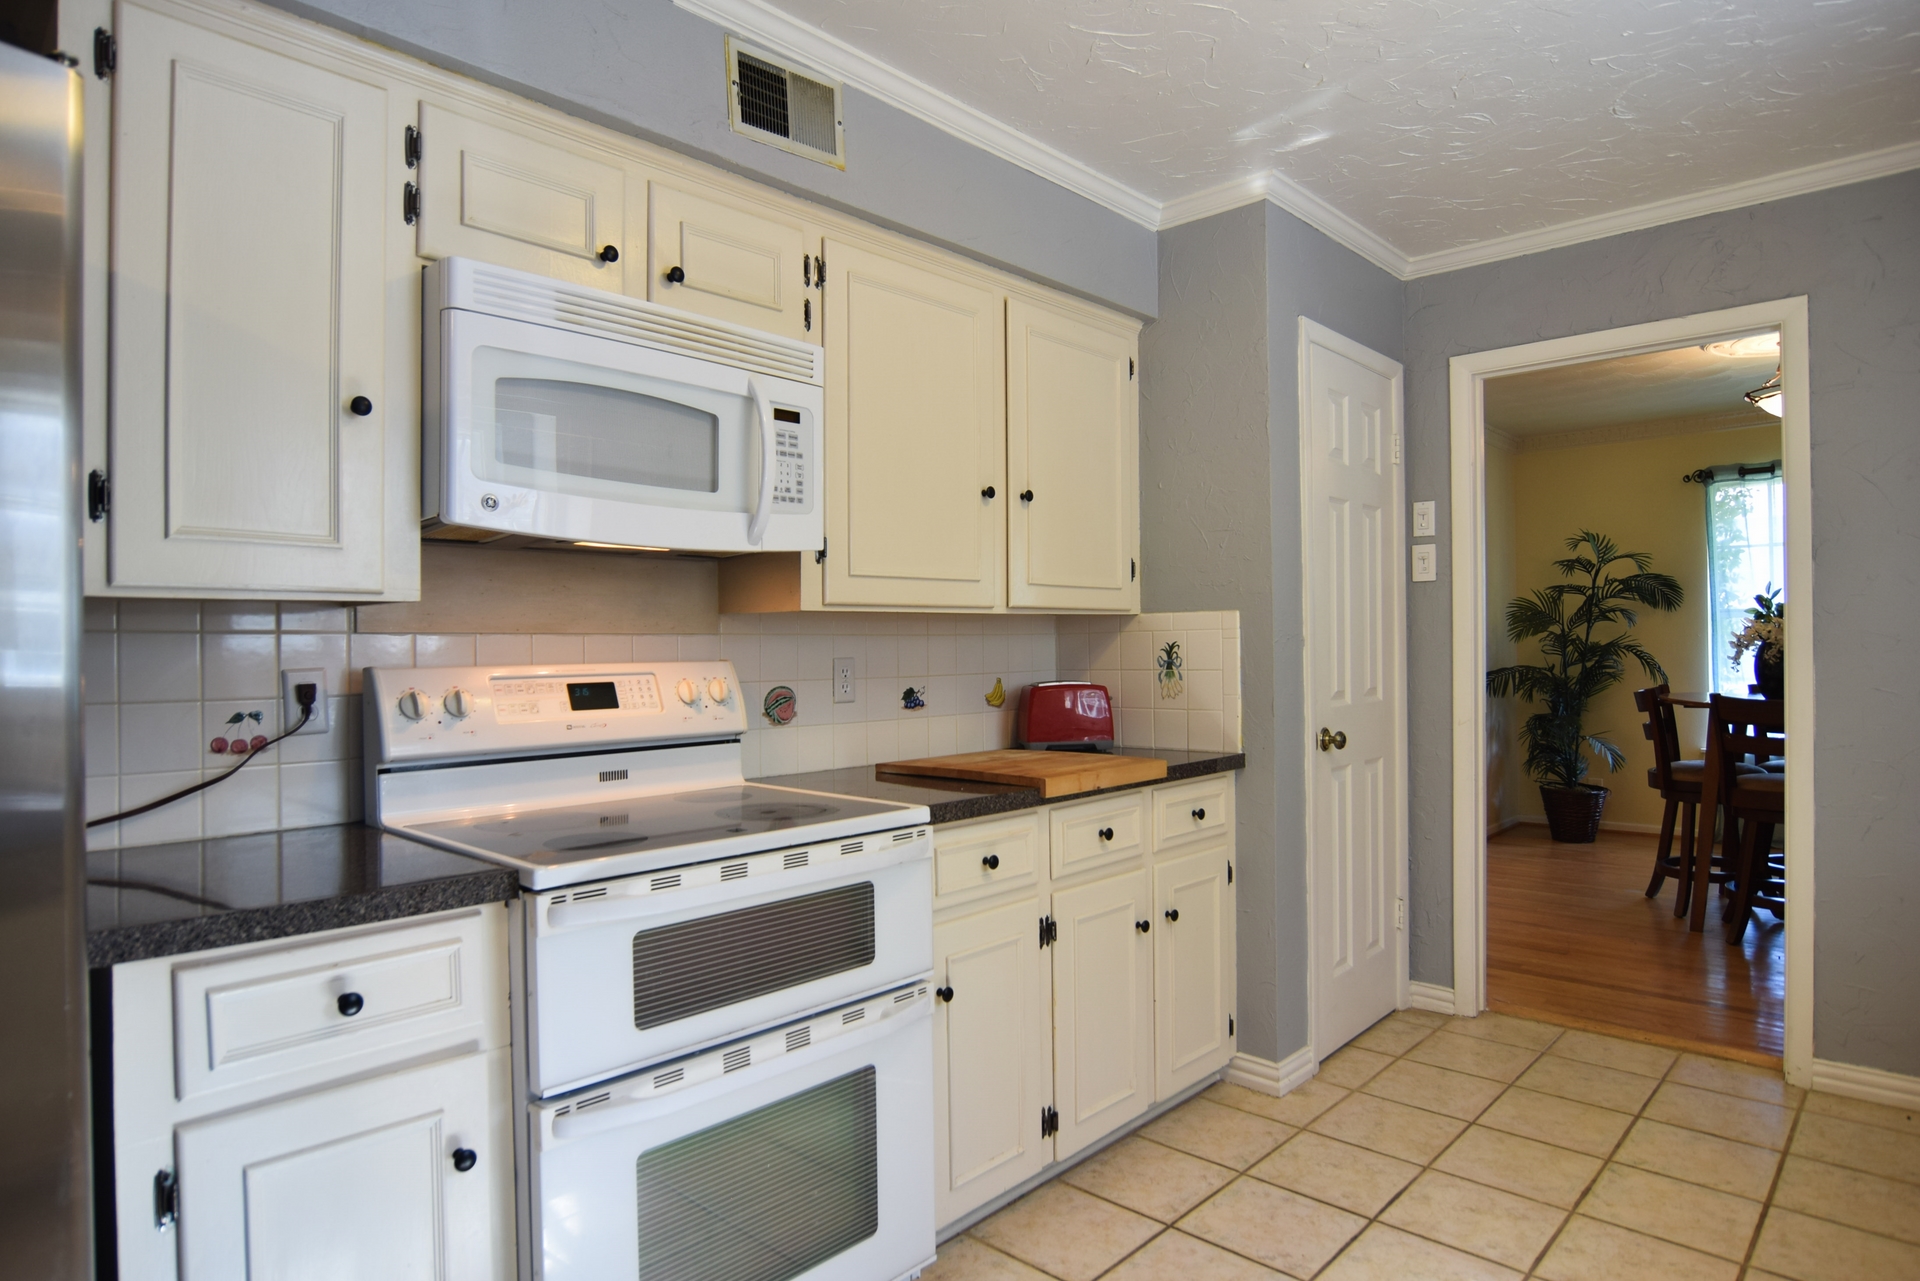 Kitchen Cooking 3235 Timberview Rd Dallas TX 75229.jpg